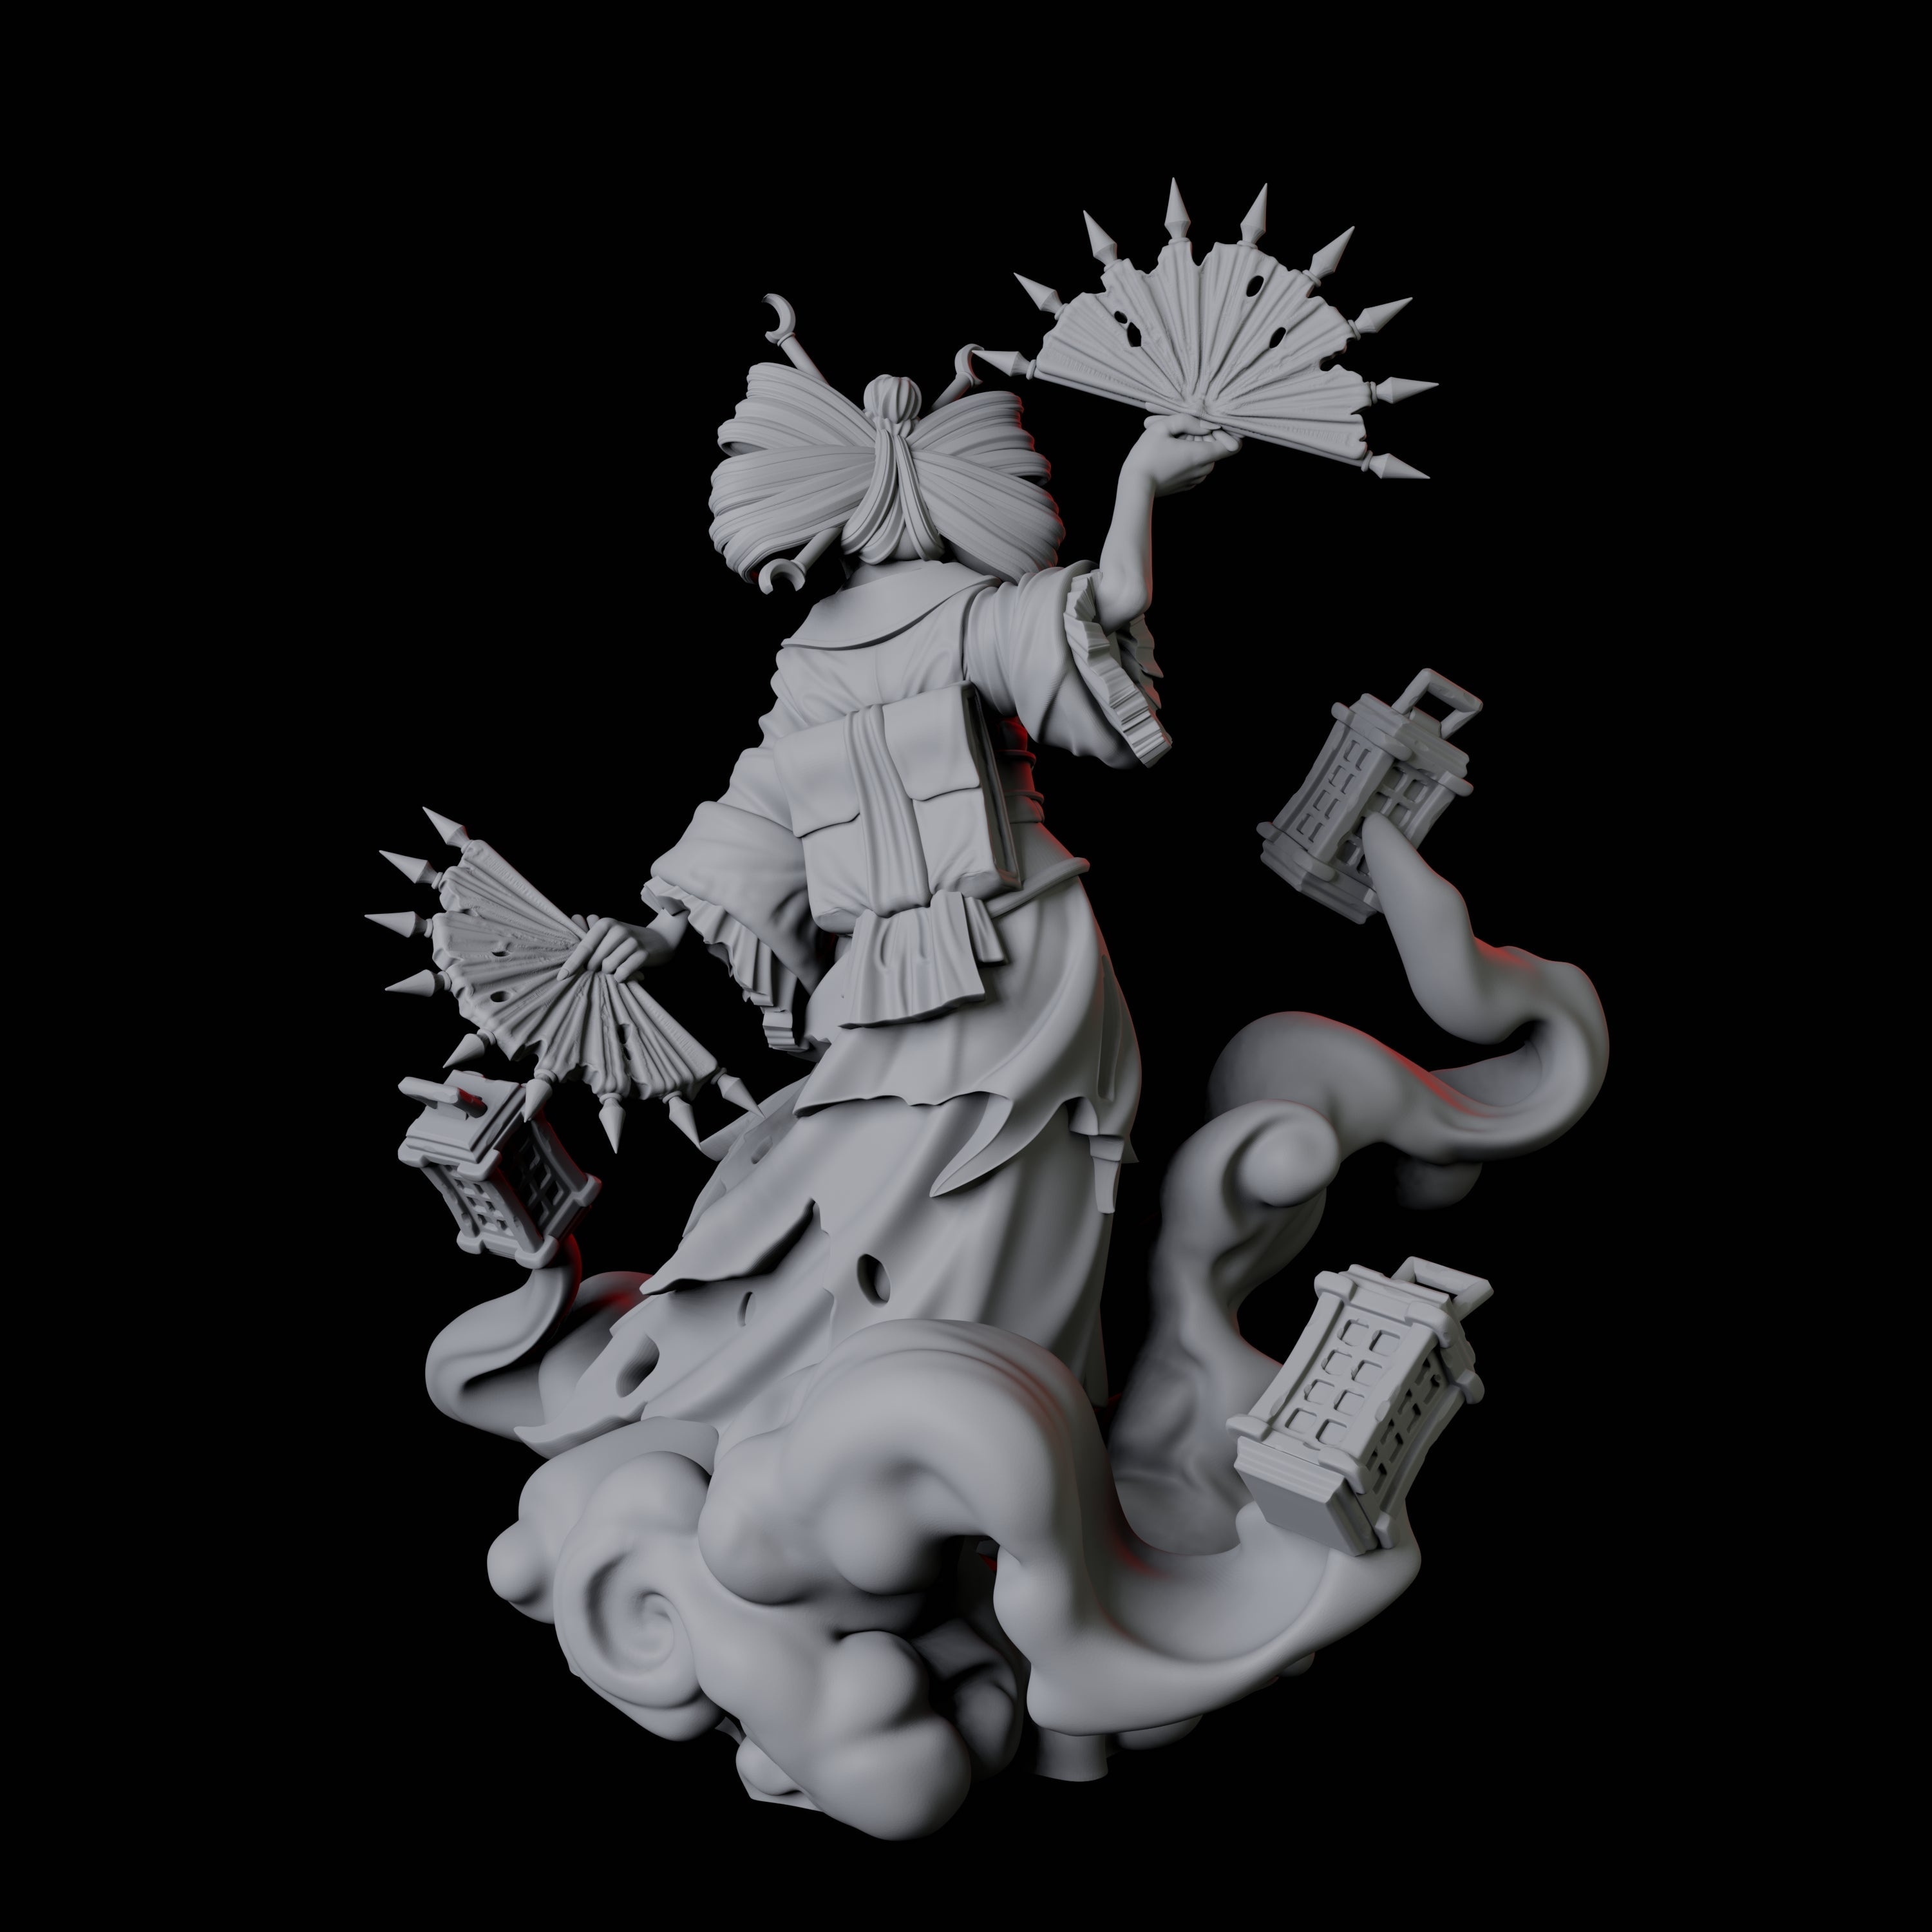 Mysterious Geisha Sorcerer B Miniature for Dungeons and Dragons, Pathfinder or other TTRPGs